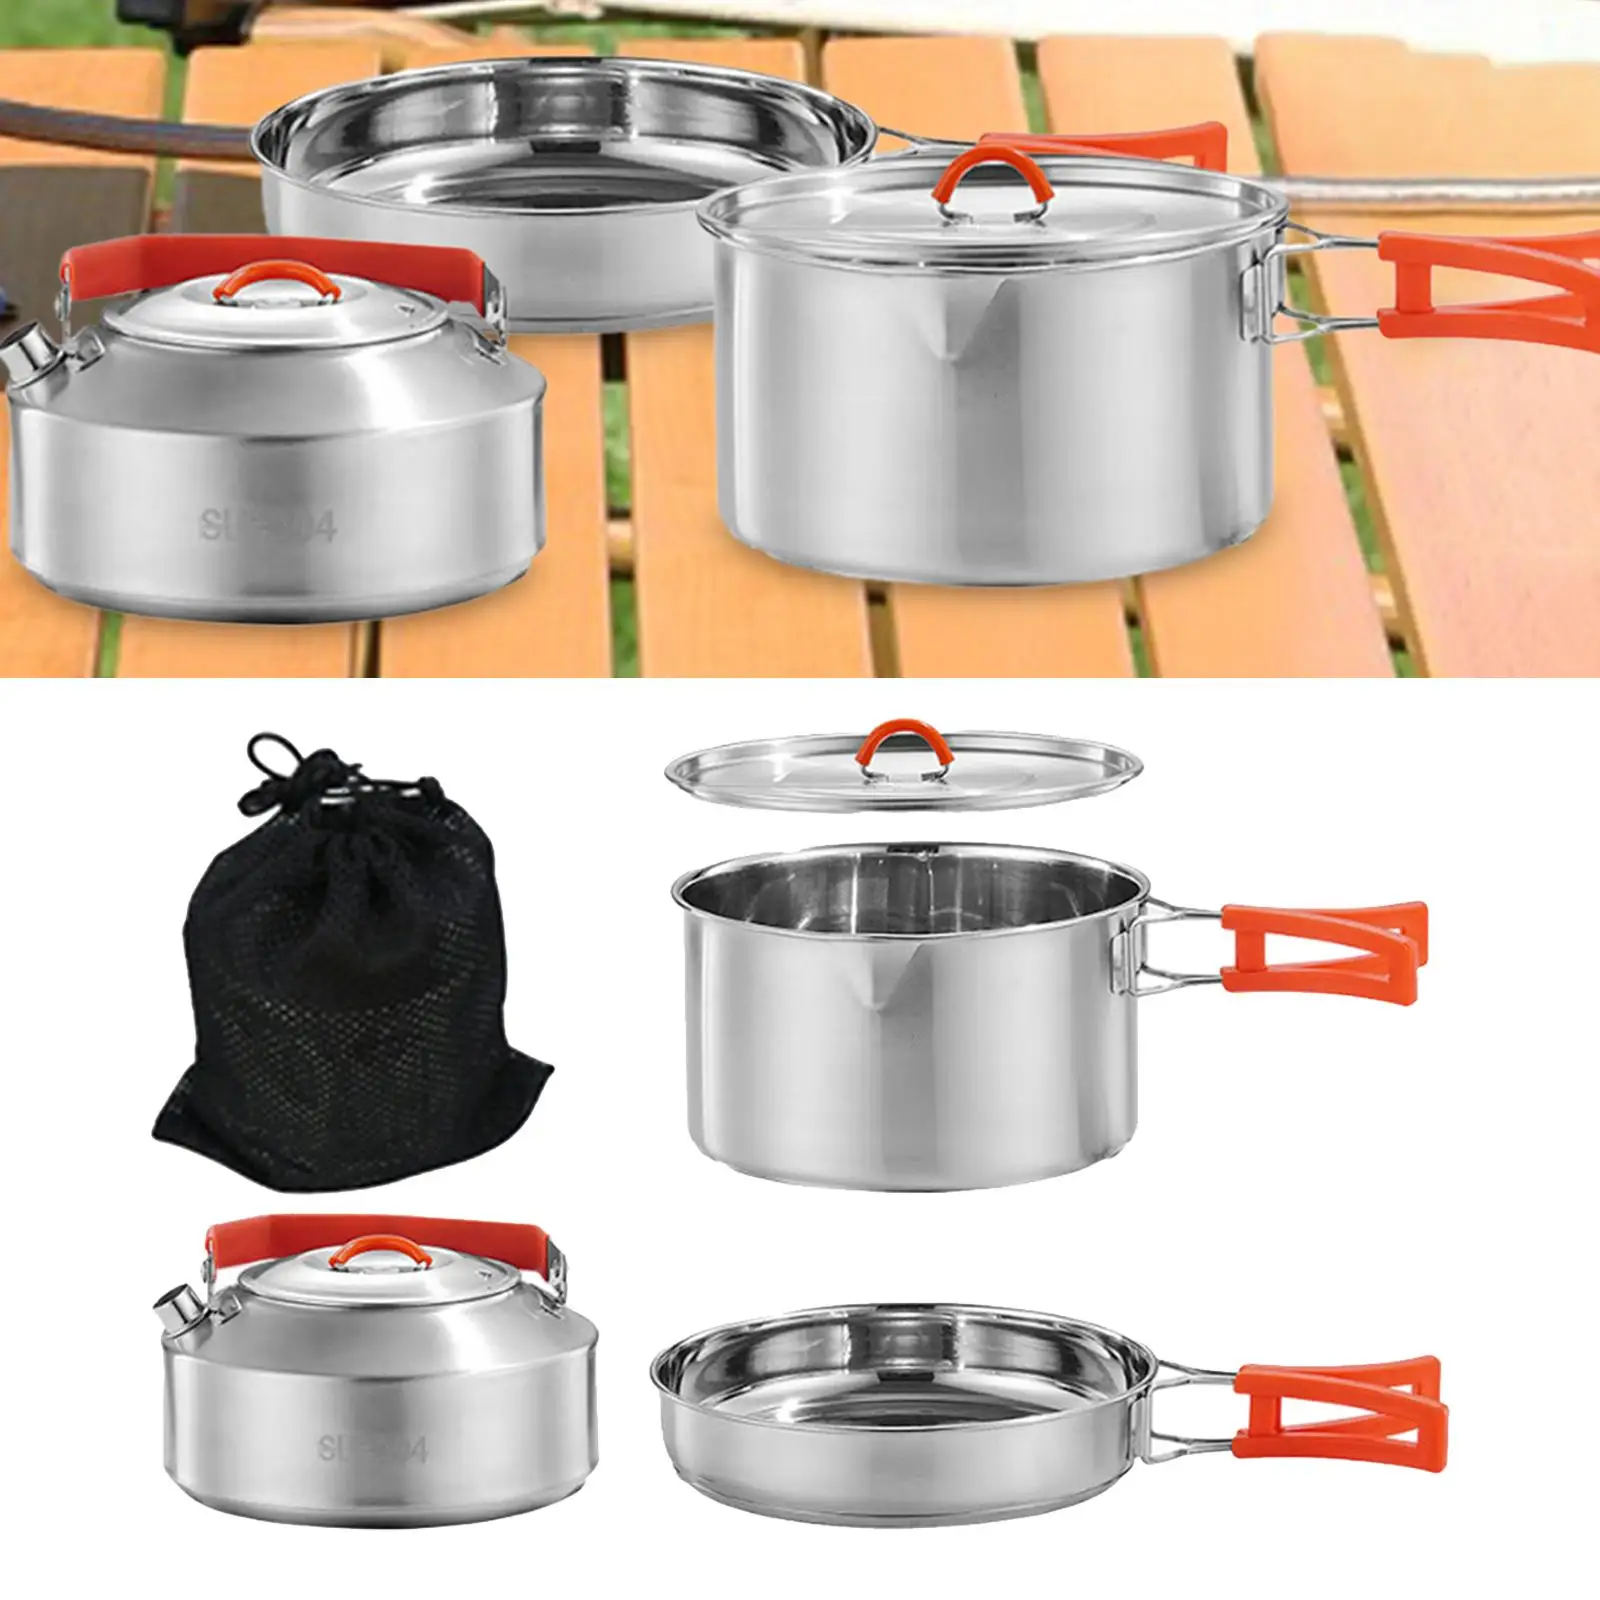 Camping Cookware Set Included Mesh Carry Bag Stainless Steel Camping Cooking Set